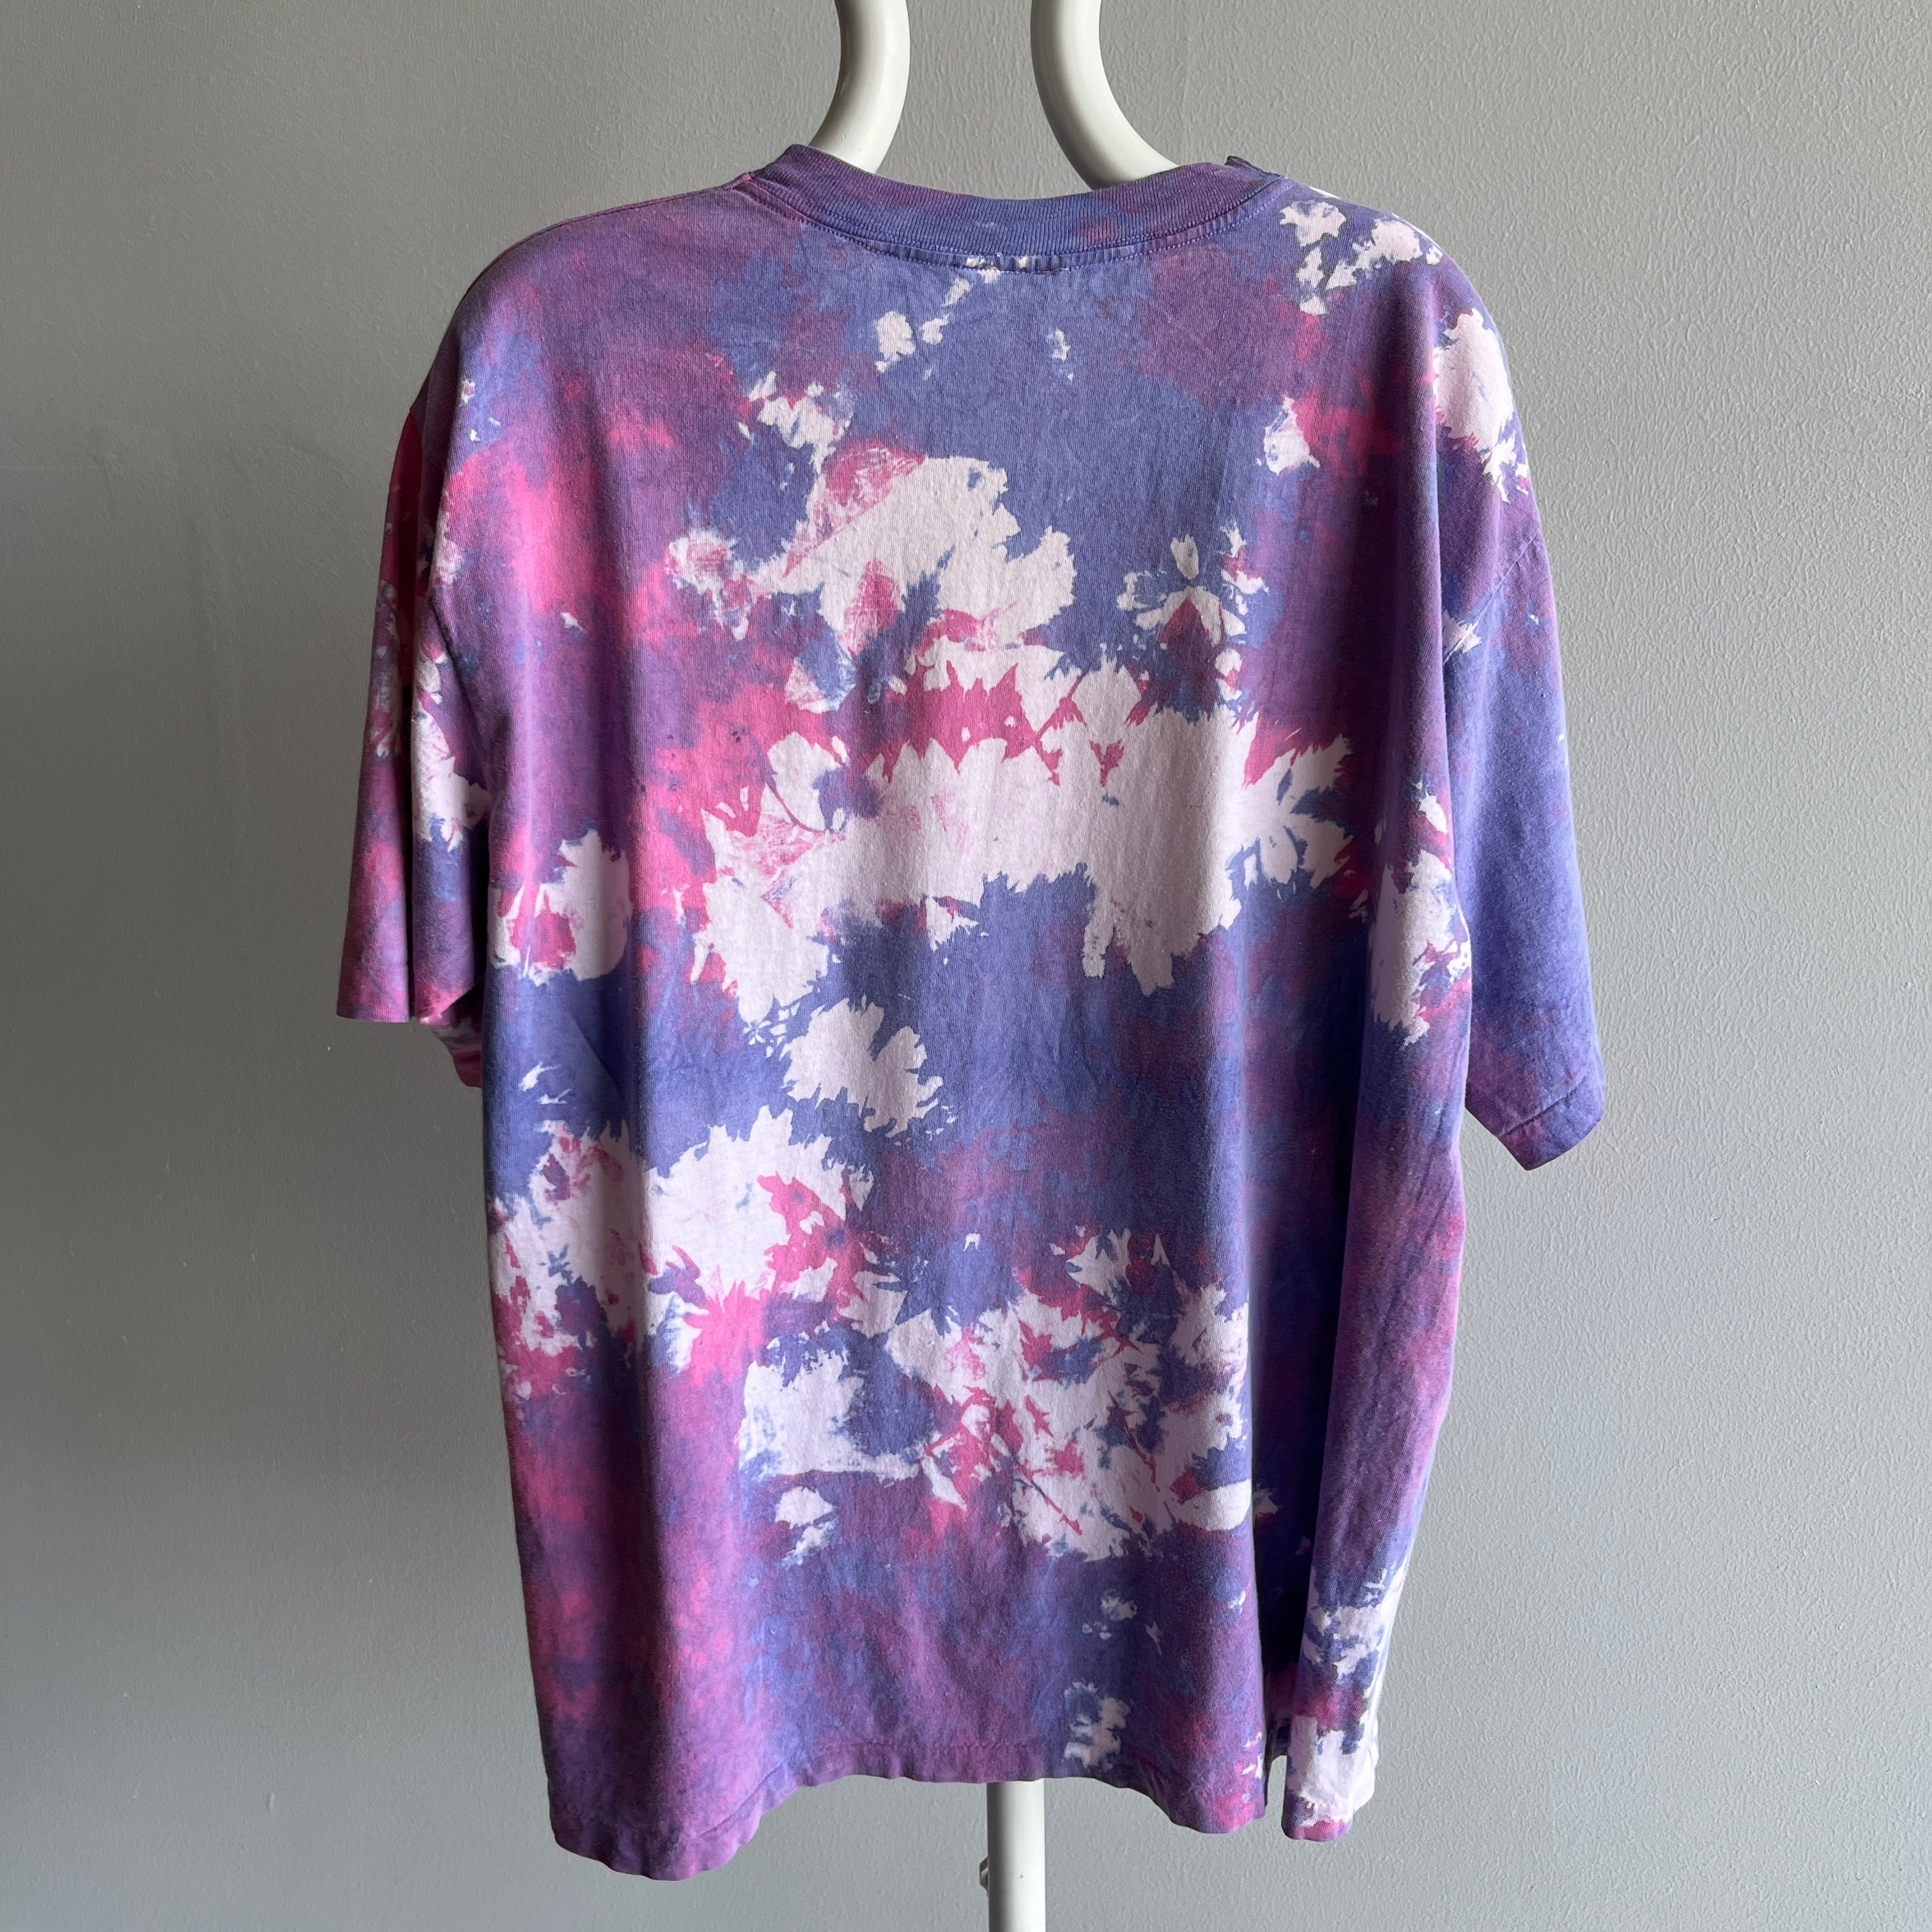 1980s Lovely Tie Dye T-Shirt - Will Keep If No One Wants :)